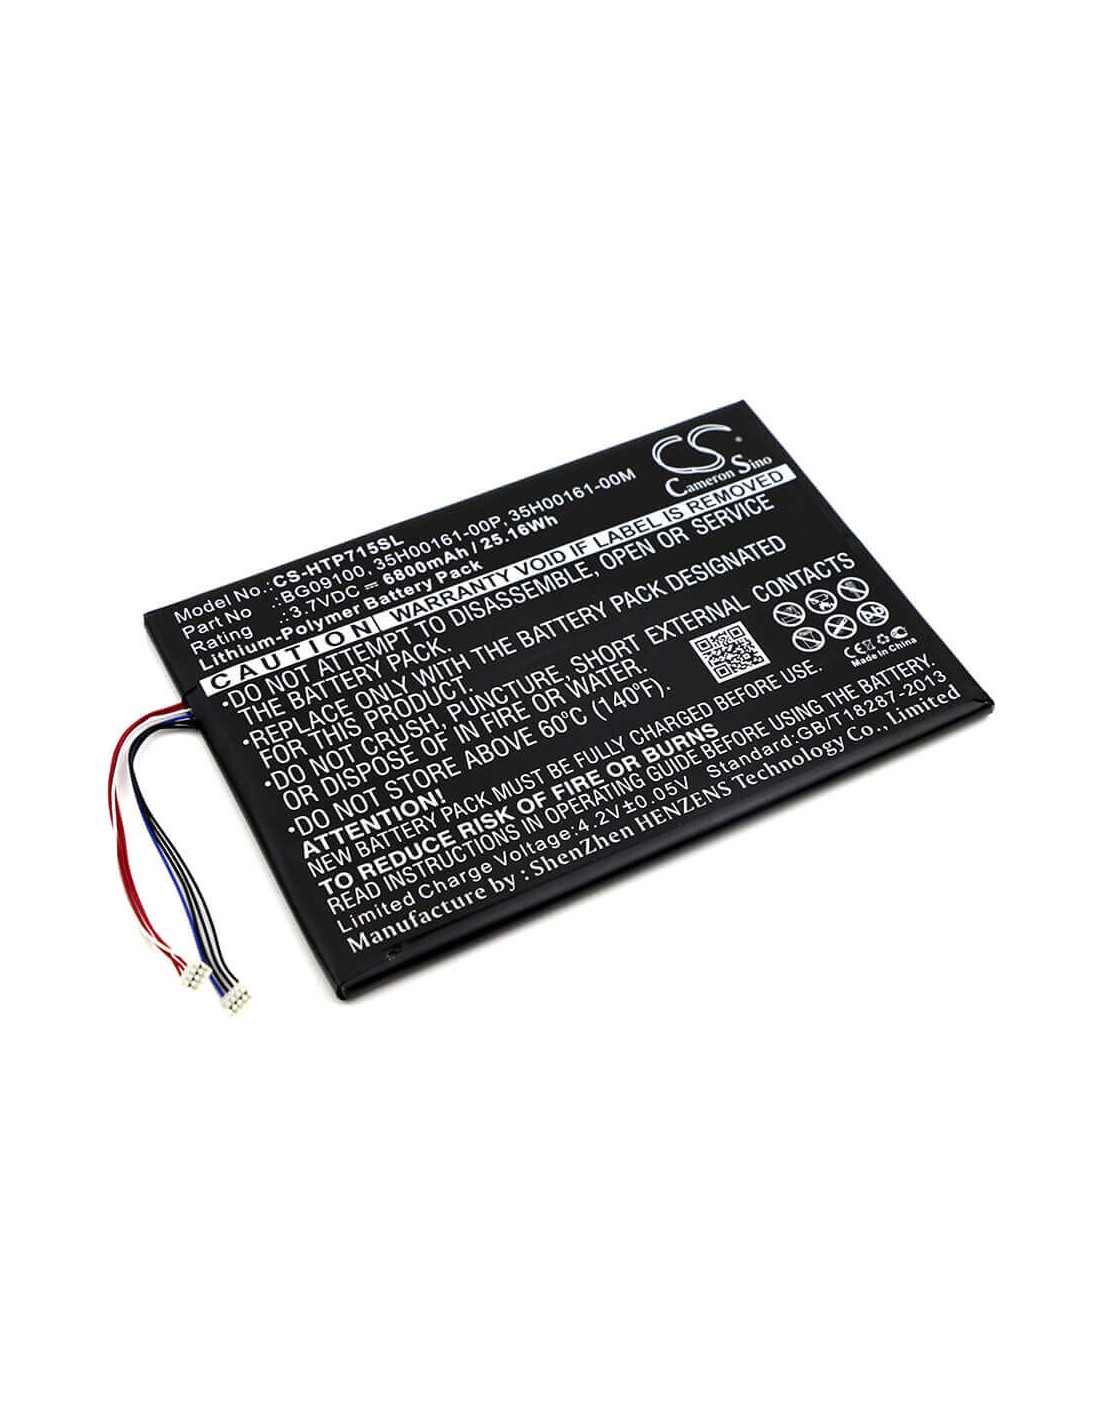 Battery for Htc Jetstream, Puccini, P715a 3.7V, 7300mAh - 27.01Wh